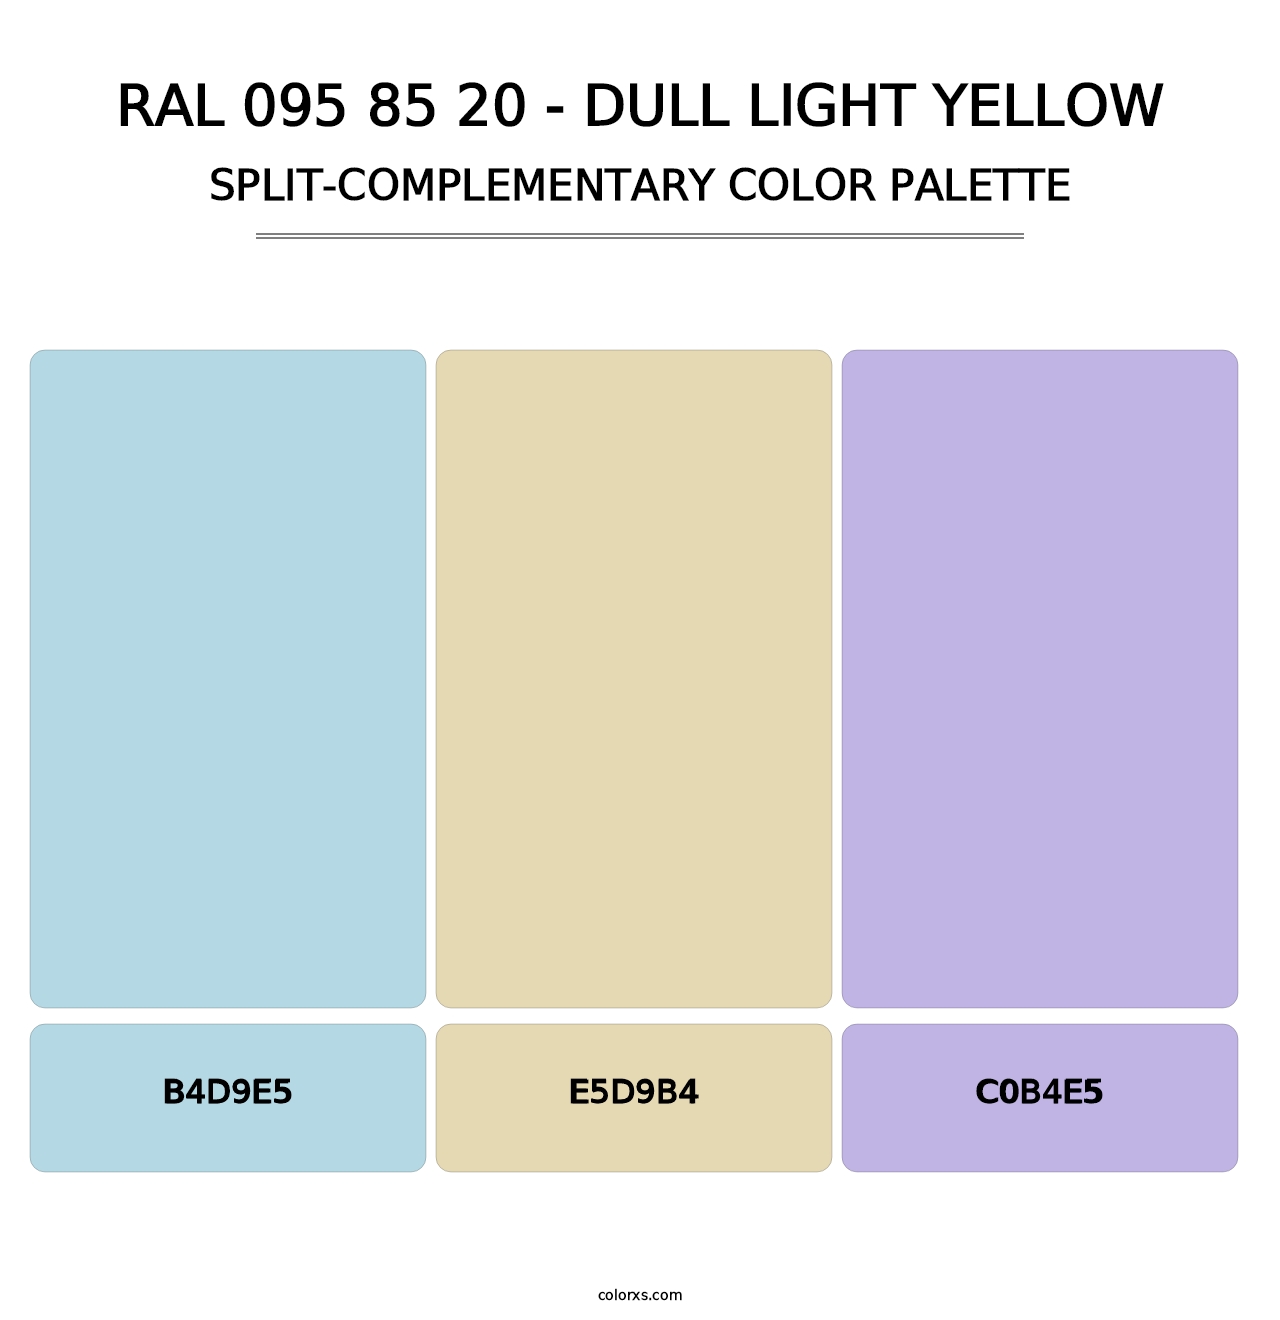 RAL 095 85 20 - Dull Light Yellow - Split-Complementary Color Palette